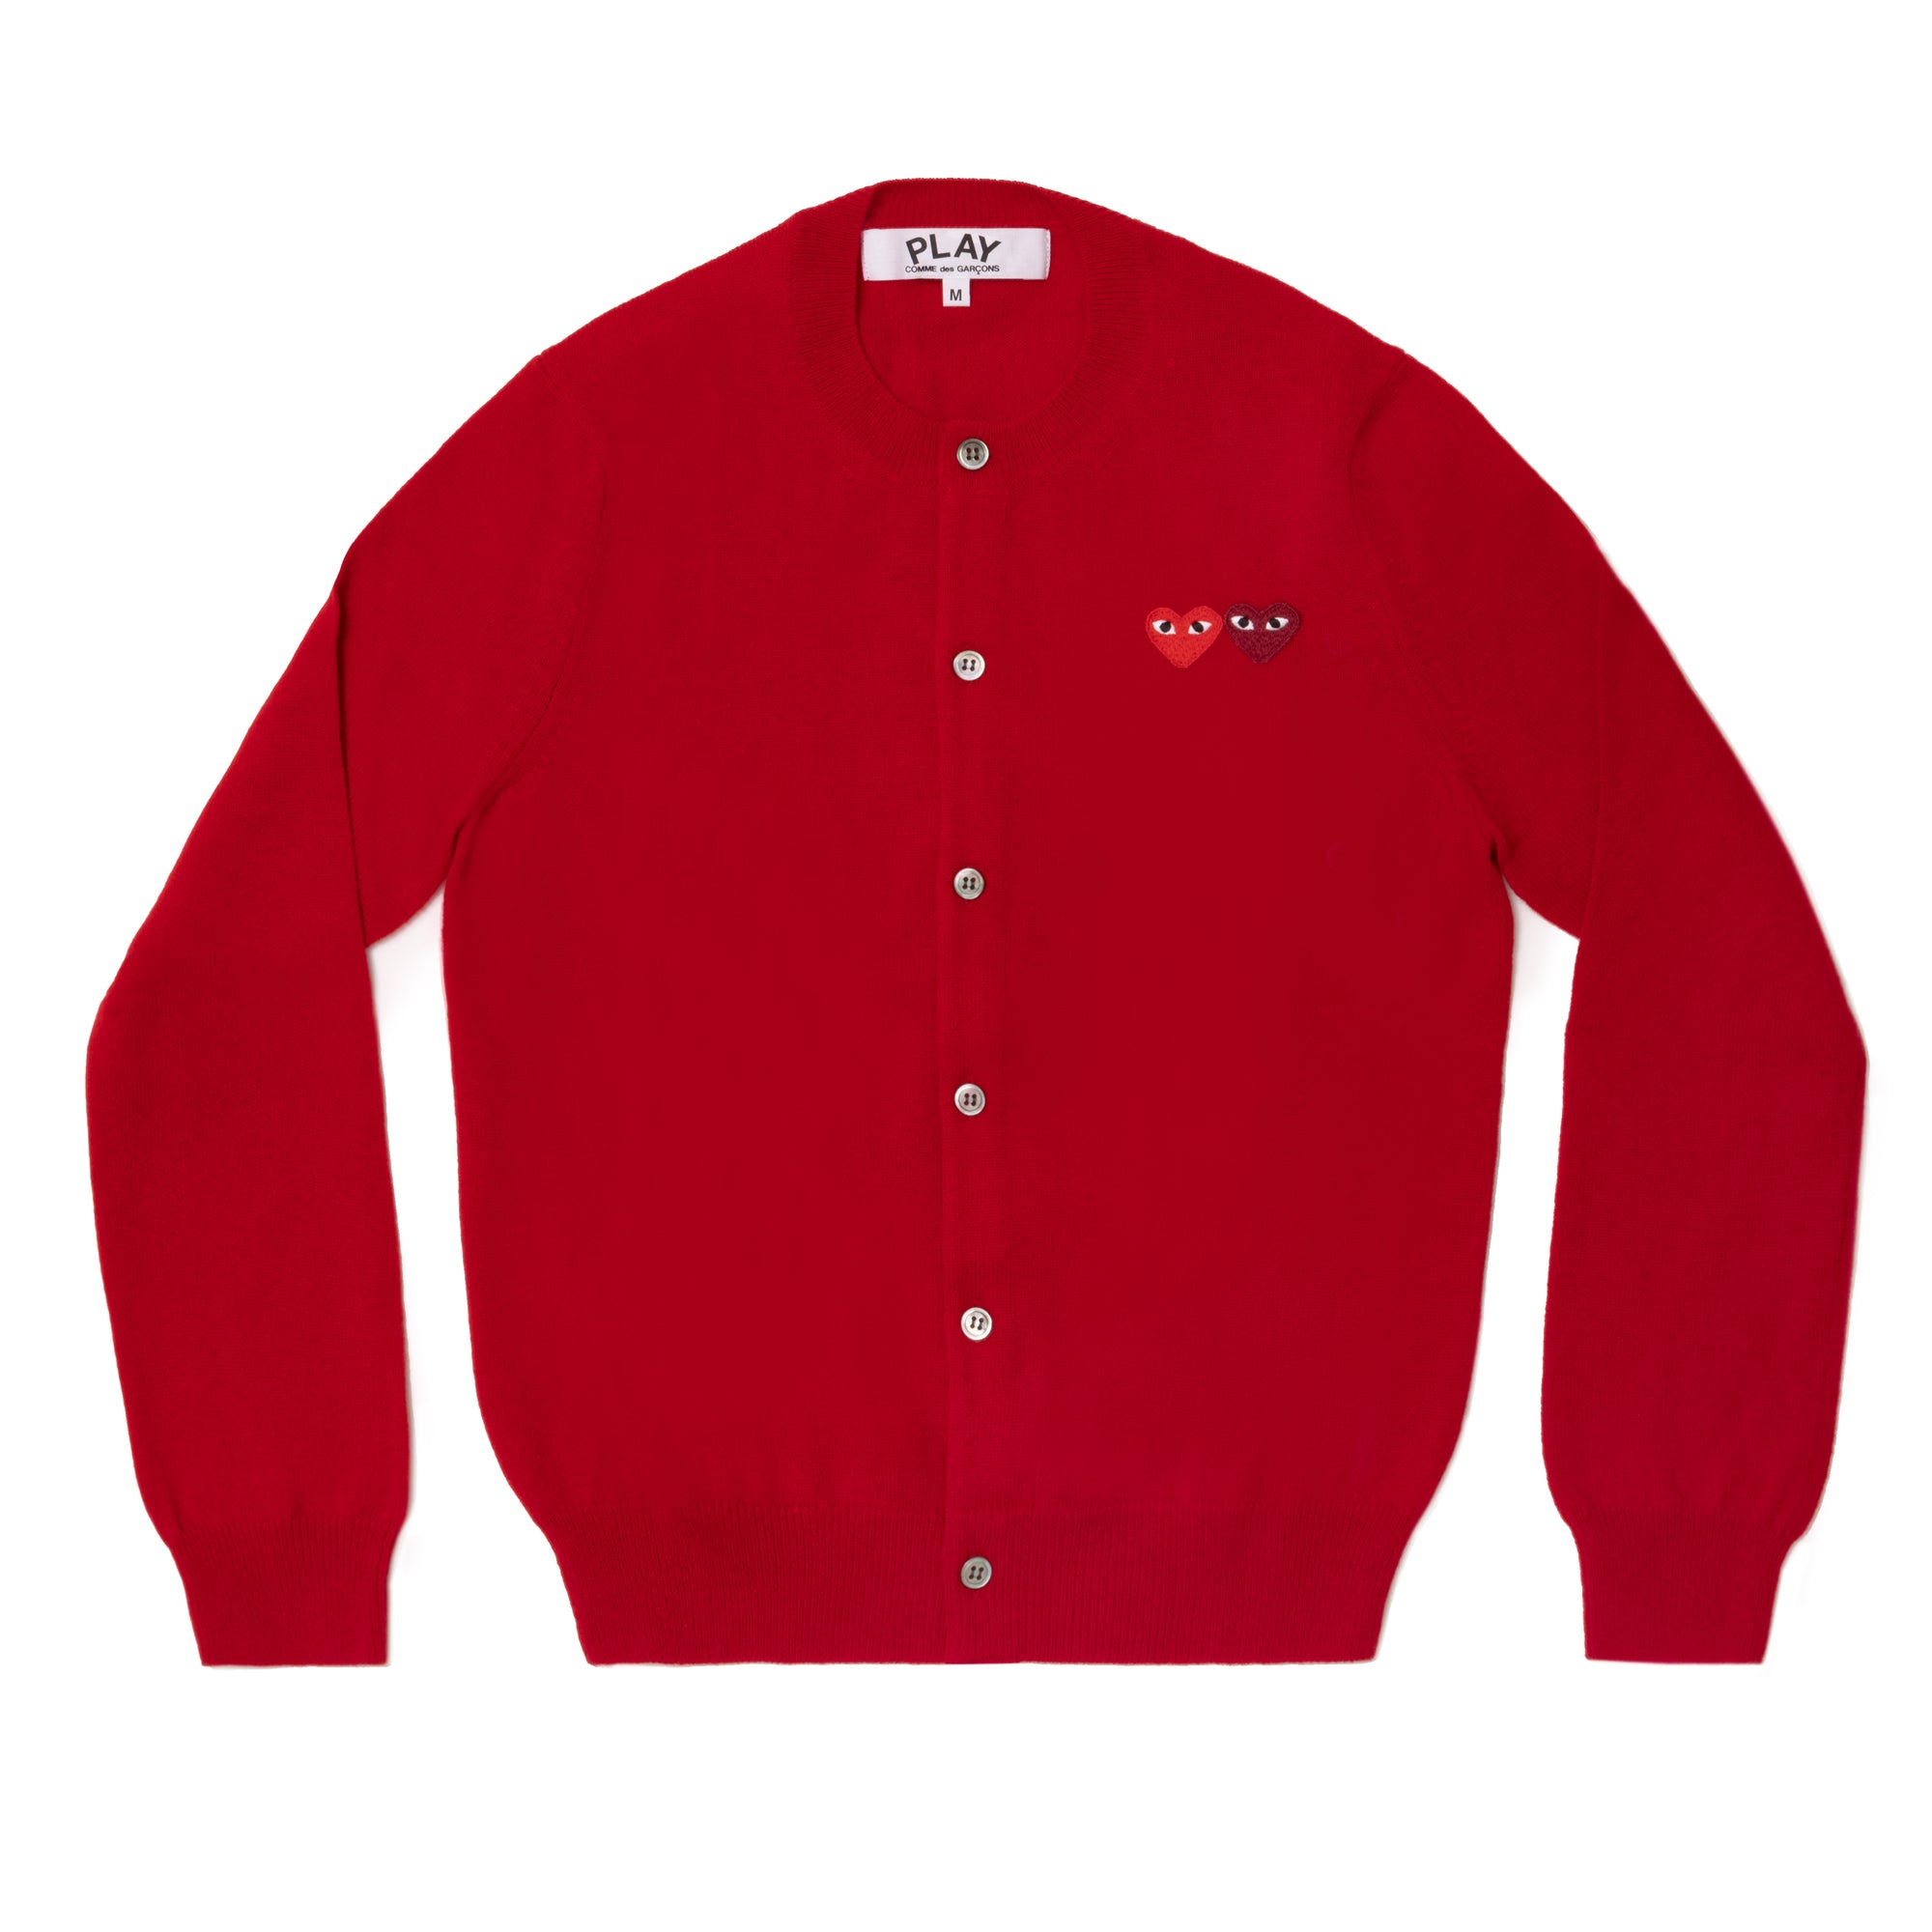 PLAY CDG - DOUBLE HEART LADIES' CARDIGAN - (RED) view 1